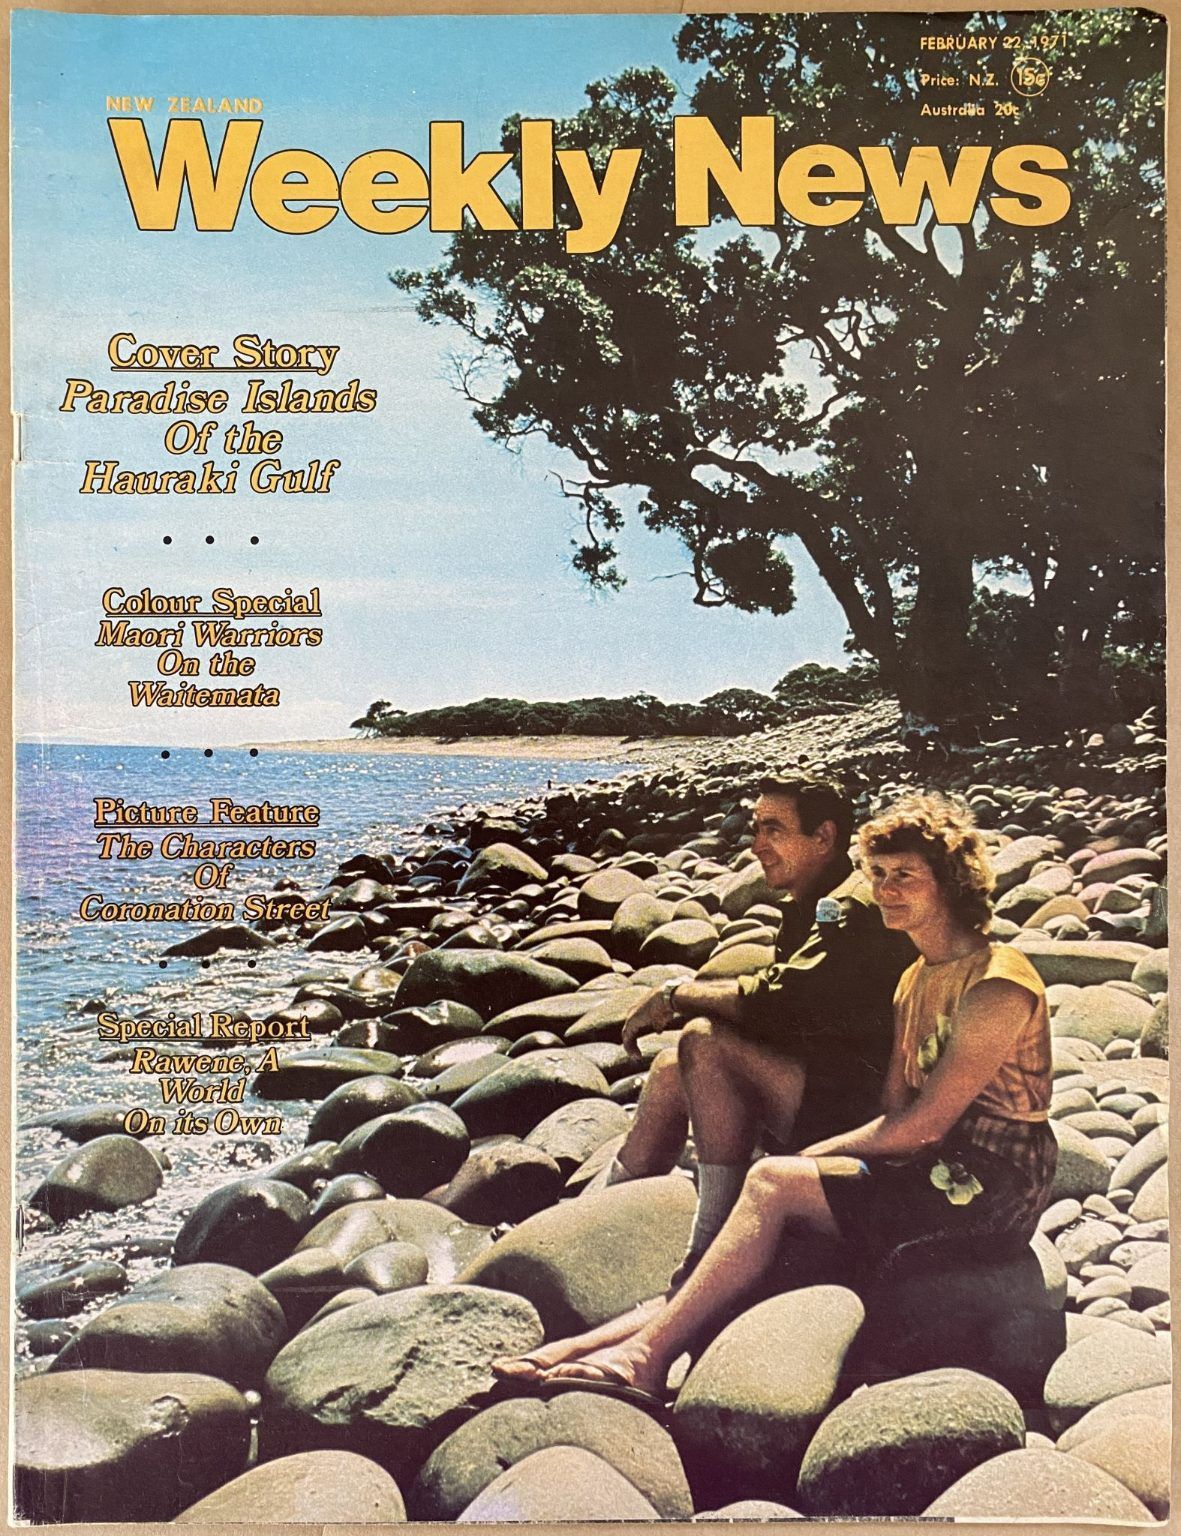 OLD NEWSPAPER: New Zealand Weekly News, No. 5594, 22 February 1971